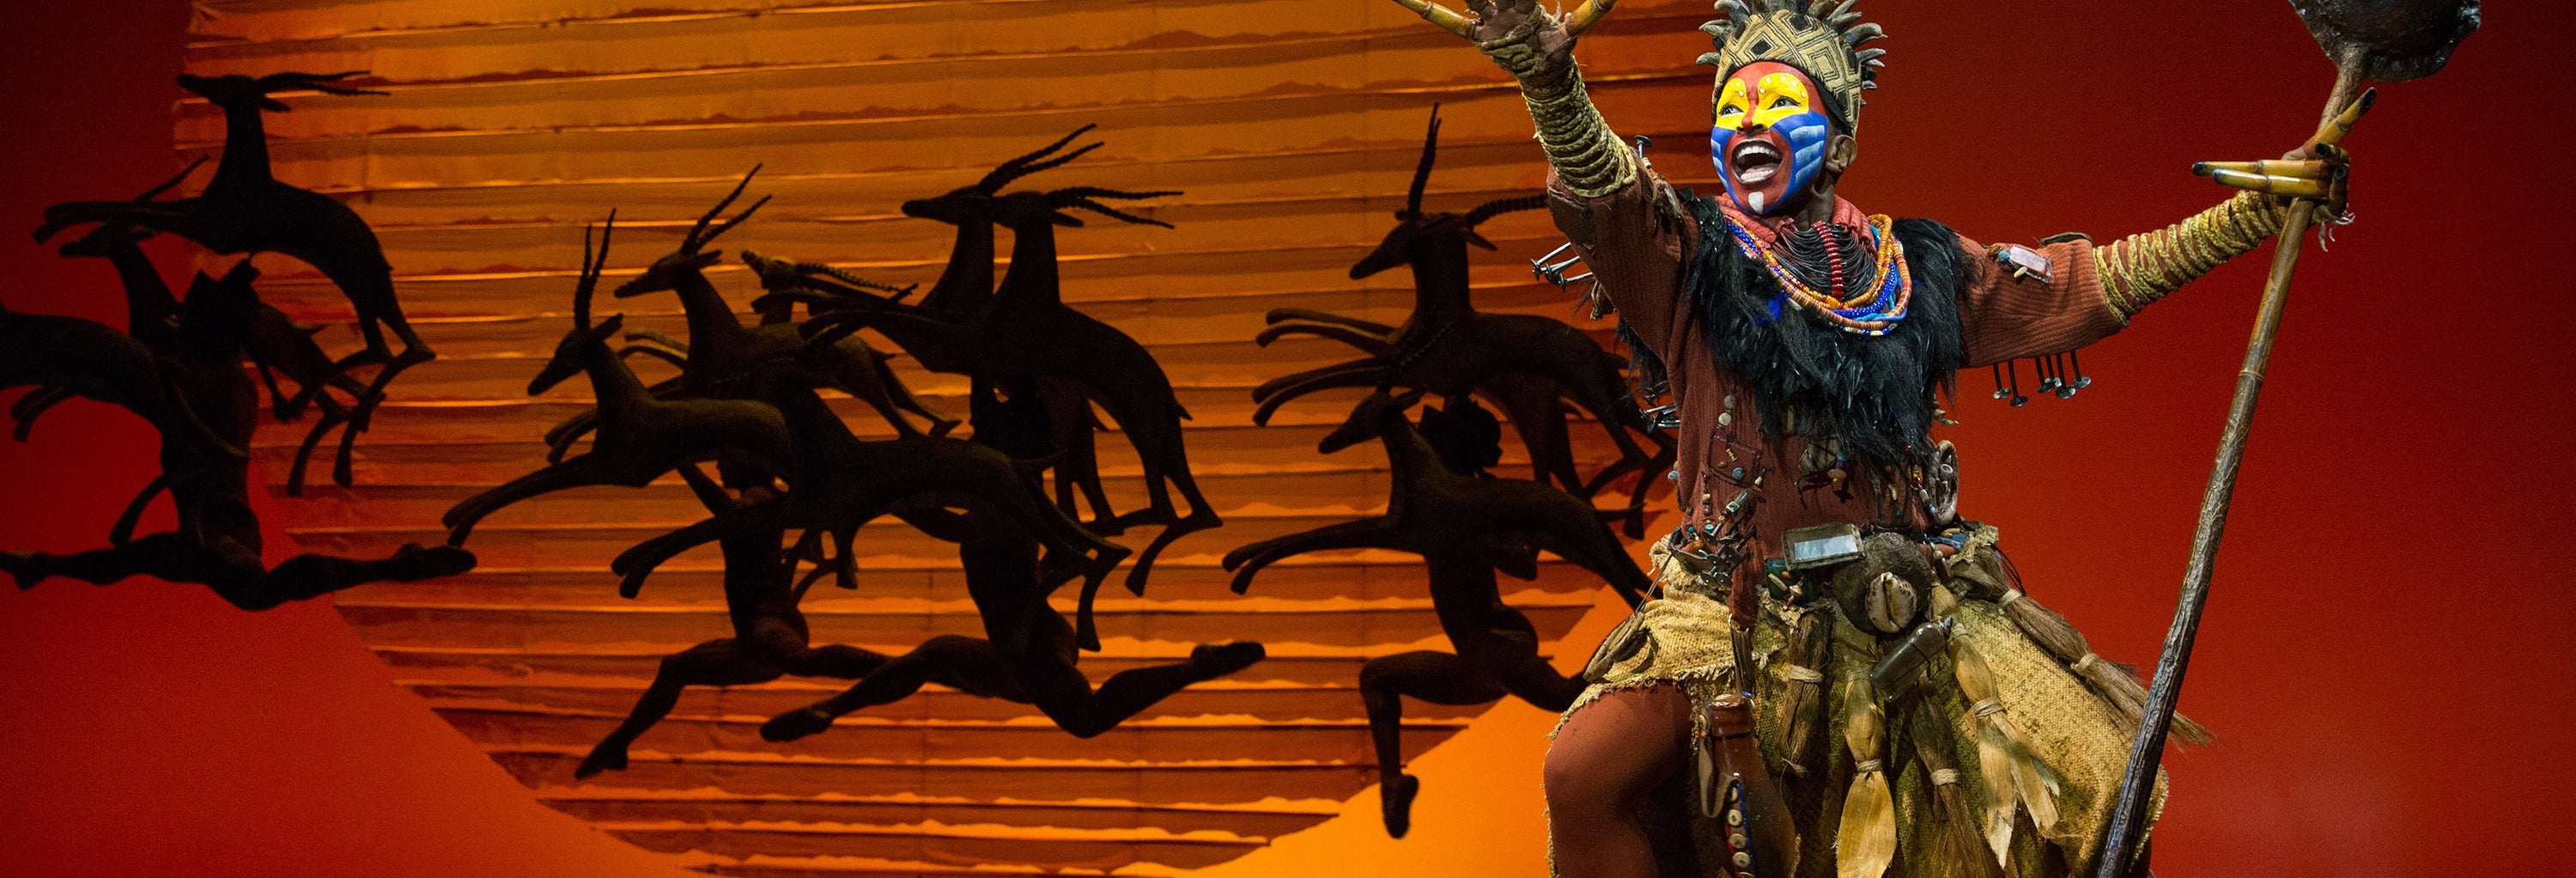 download the lion king broadway cheap tickets